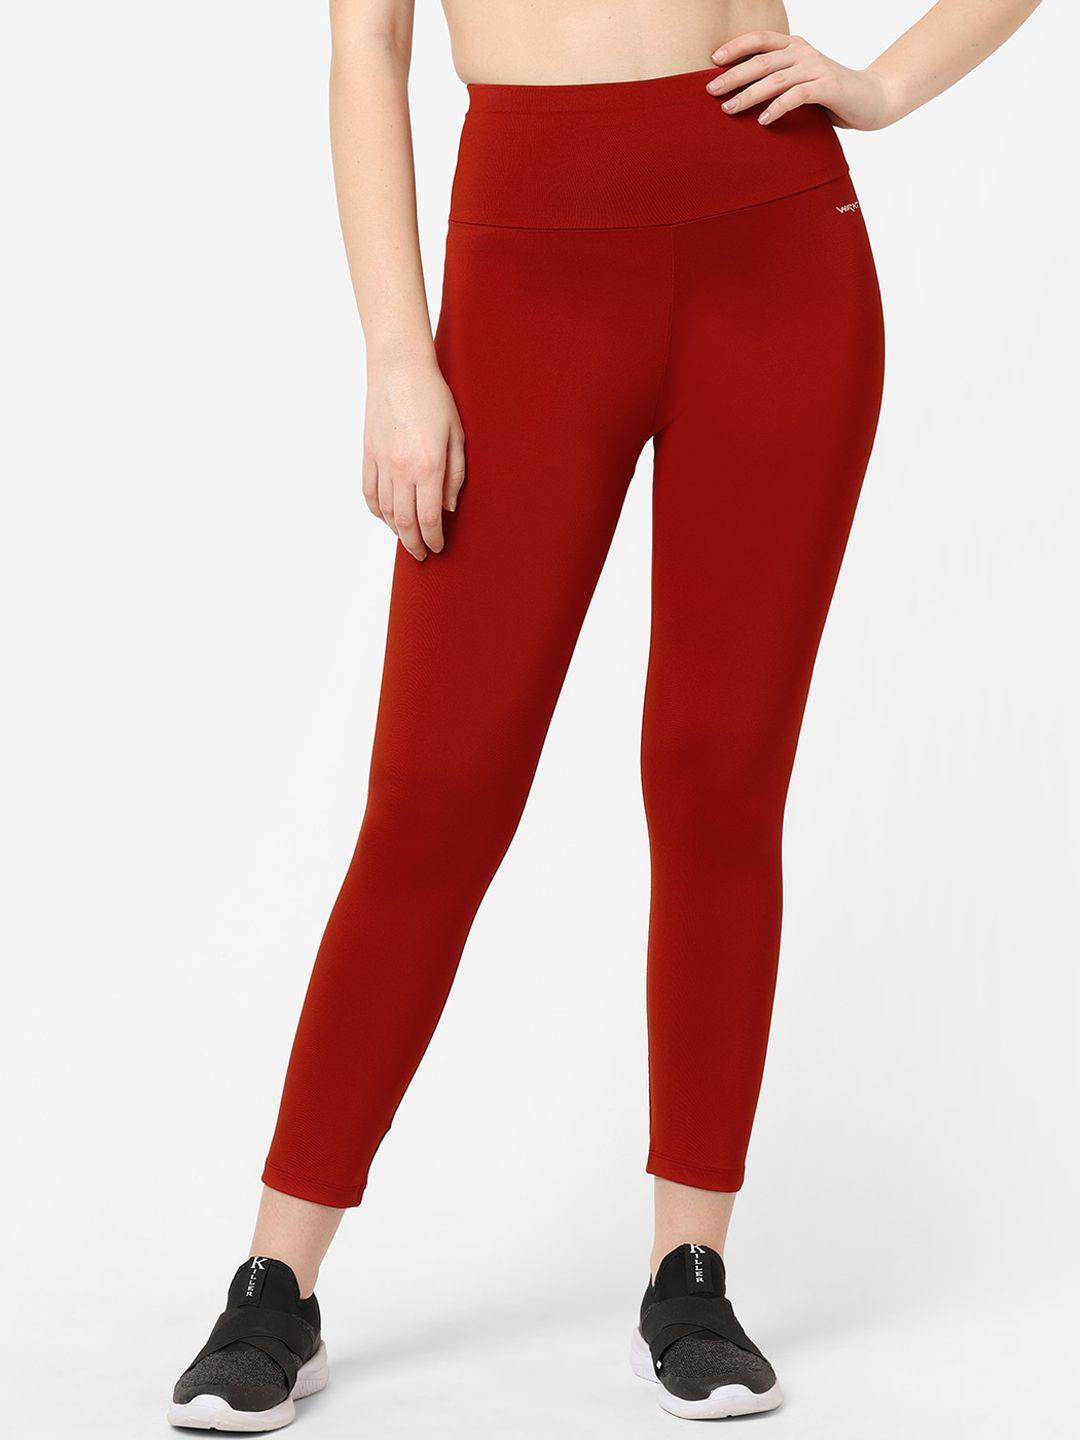 sweet-dreams-women-red-solid-tights